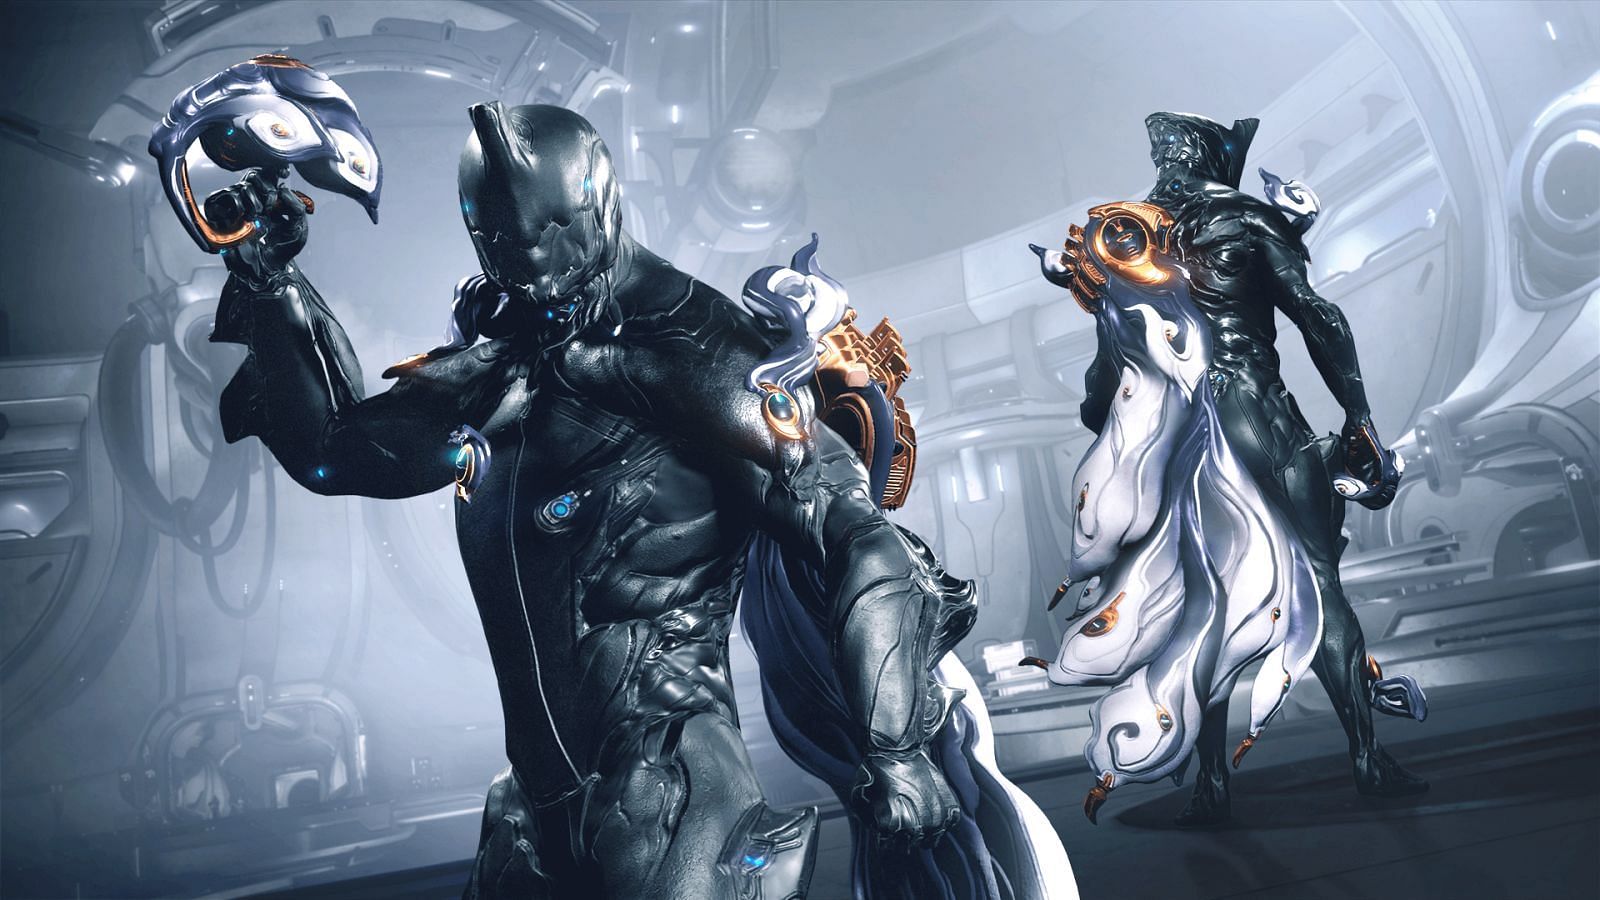 Steelseries x Warframe giveaway event offers exciting cosmetics to players from all platforms (image via Digital Extremes)